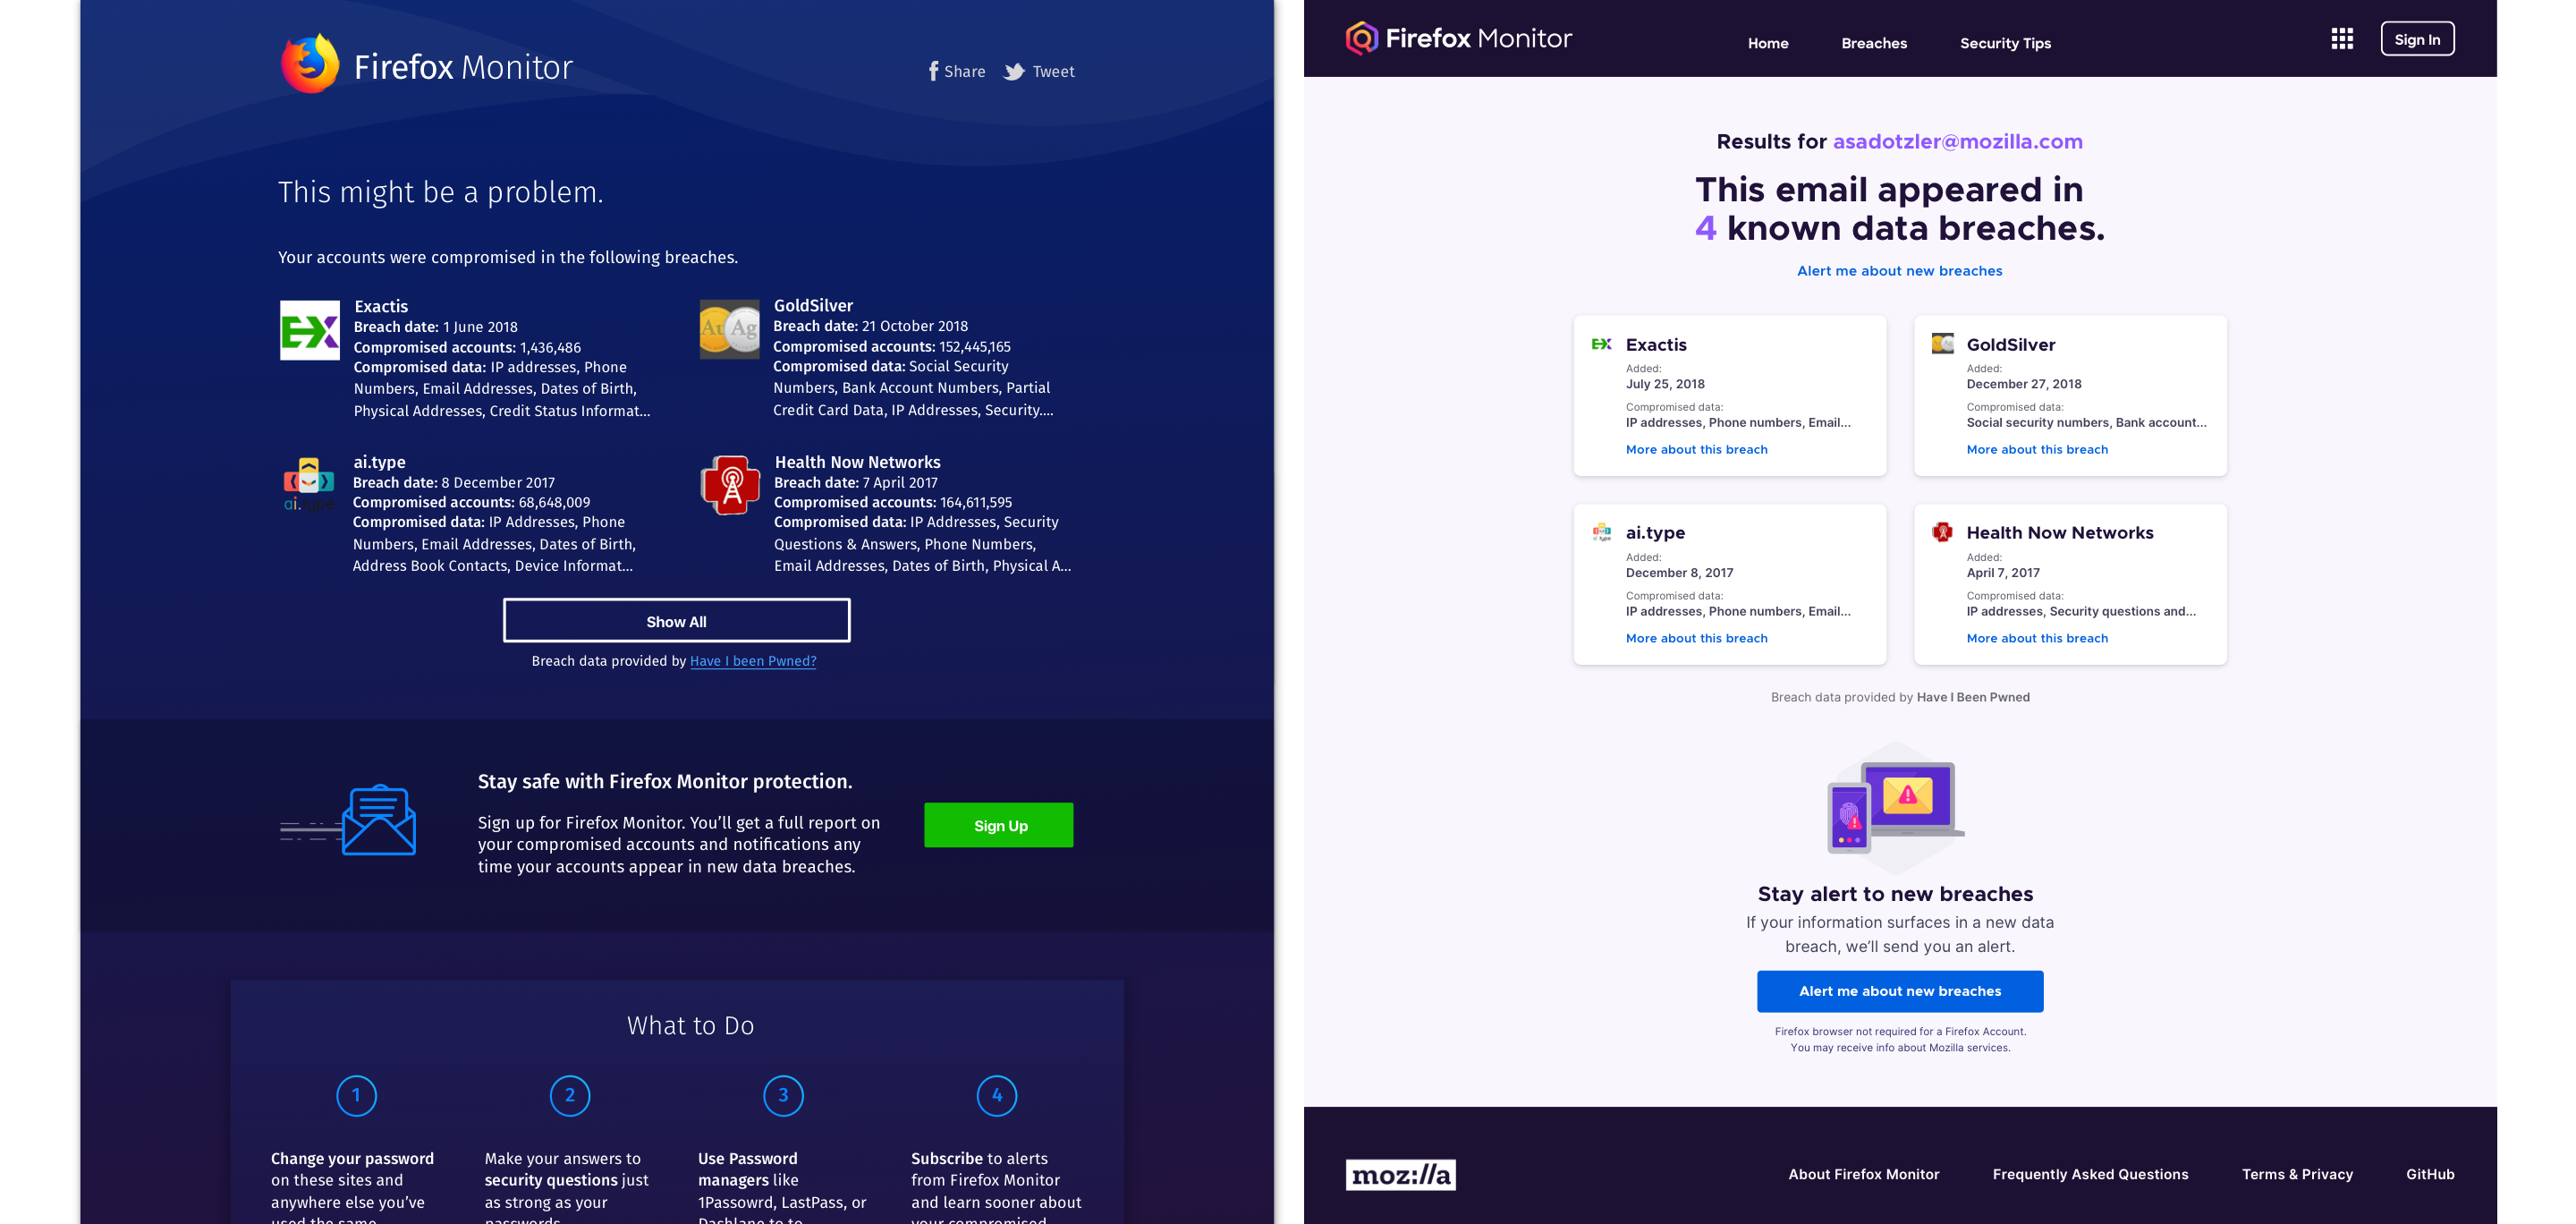 A side-by-side comparison of breach results before and after the redesign.